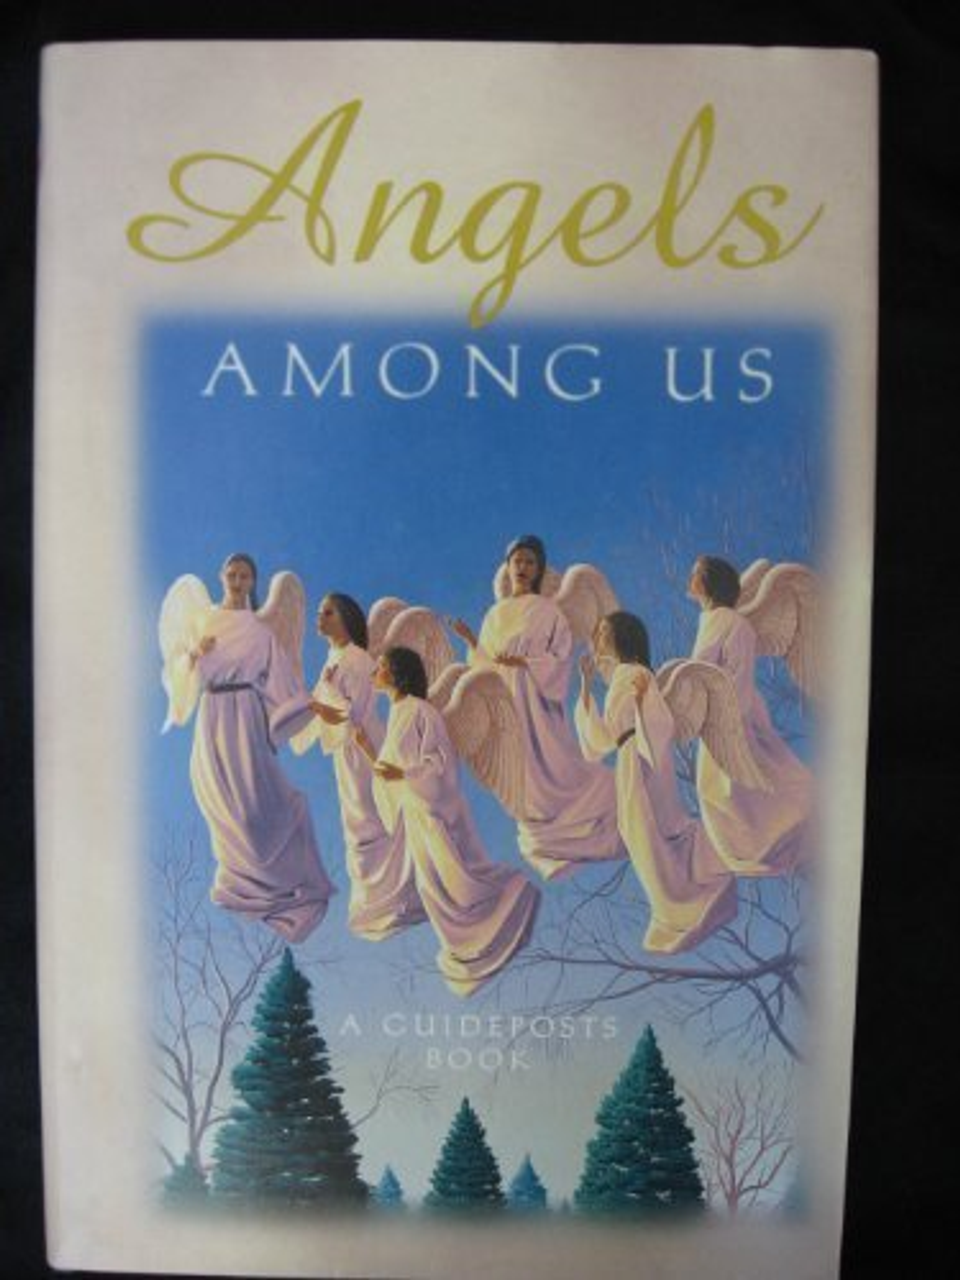 Angels Among Us A Guideposts Book 